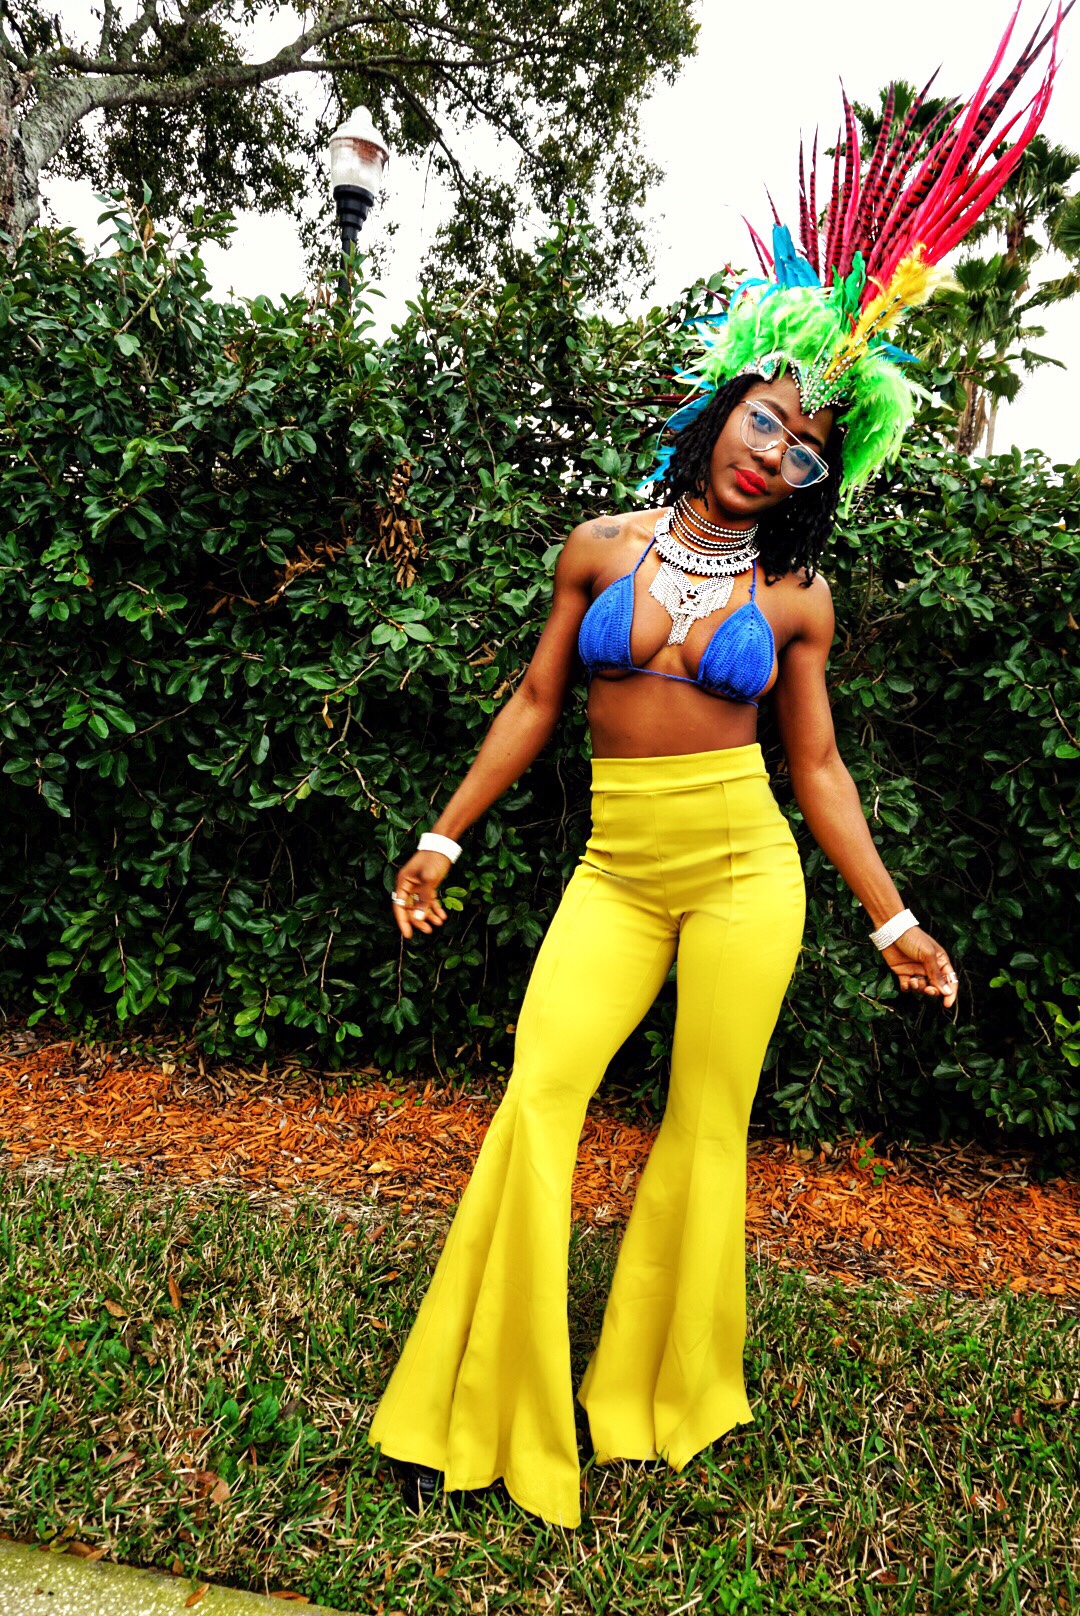 15 Carnival/Fete Wear Outfit Ideas & Where To Find Them